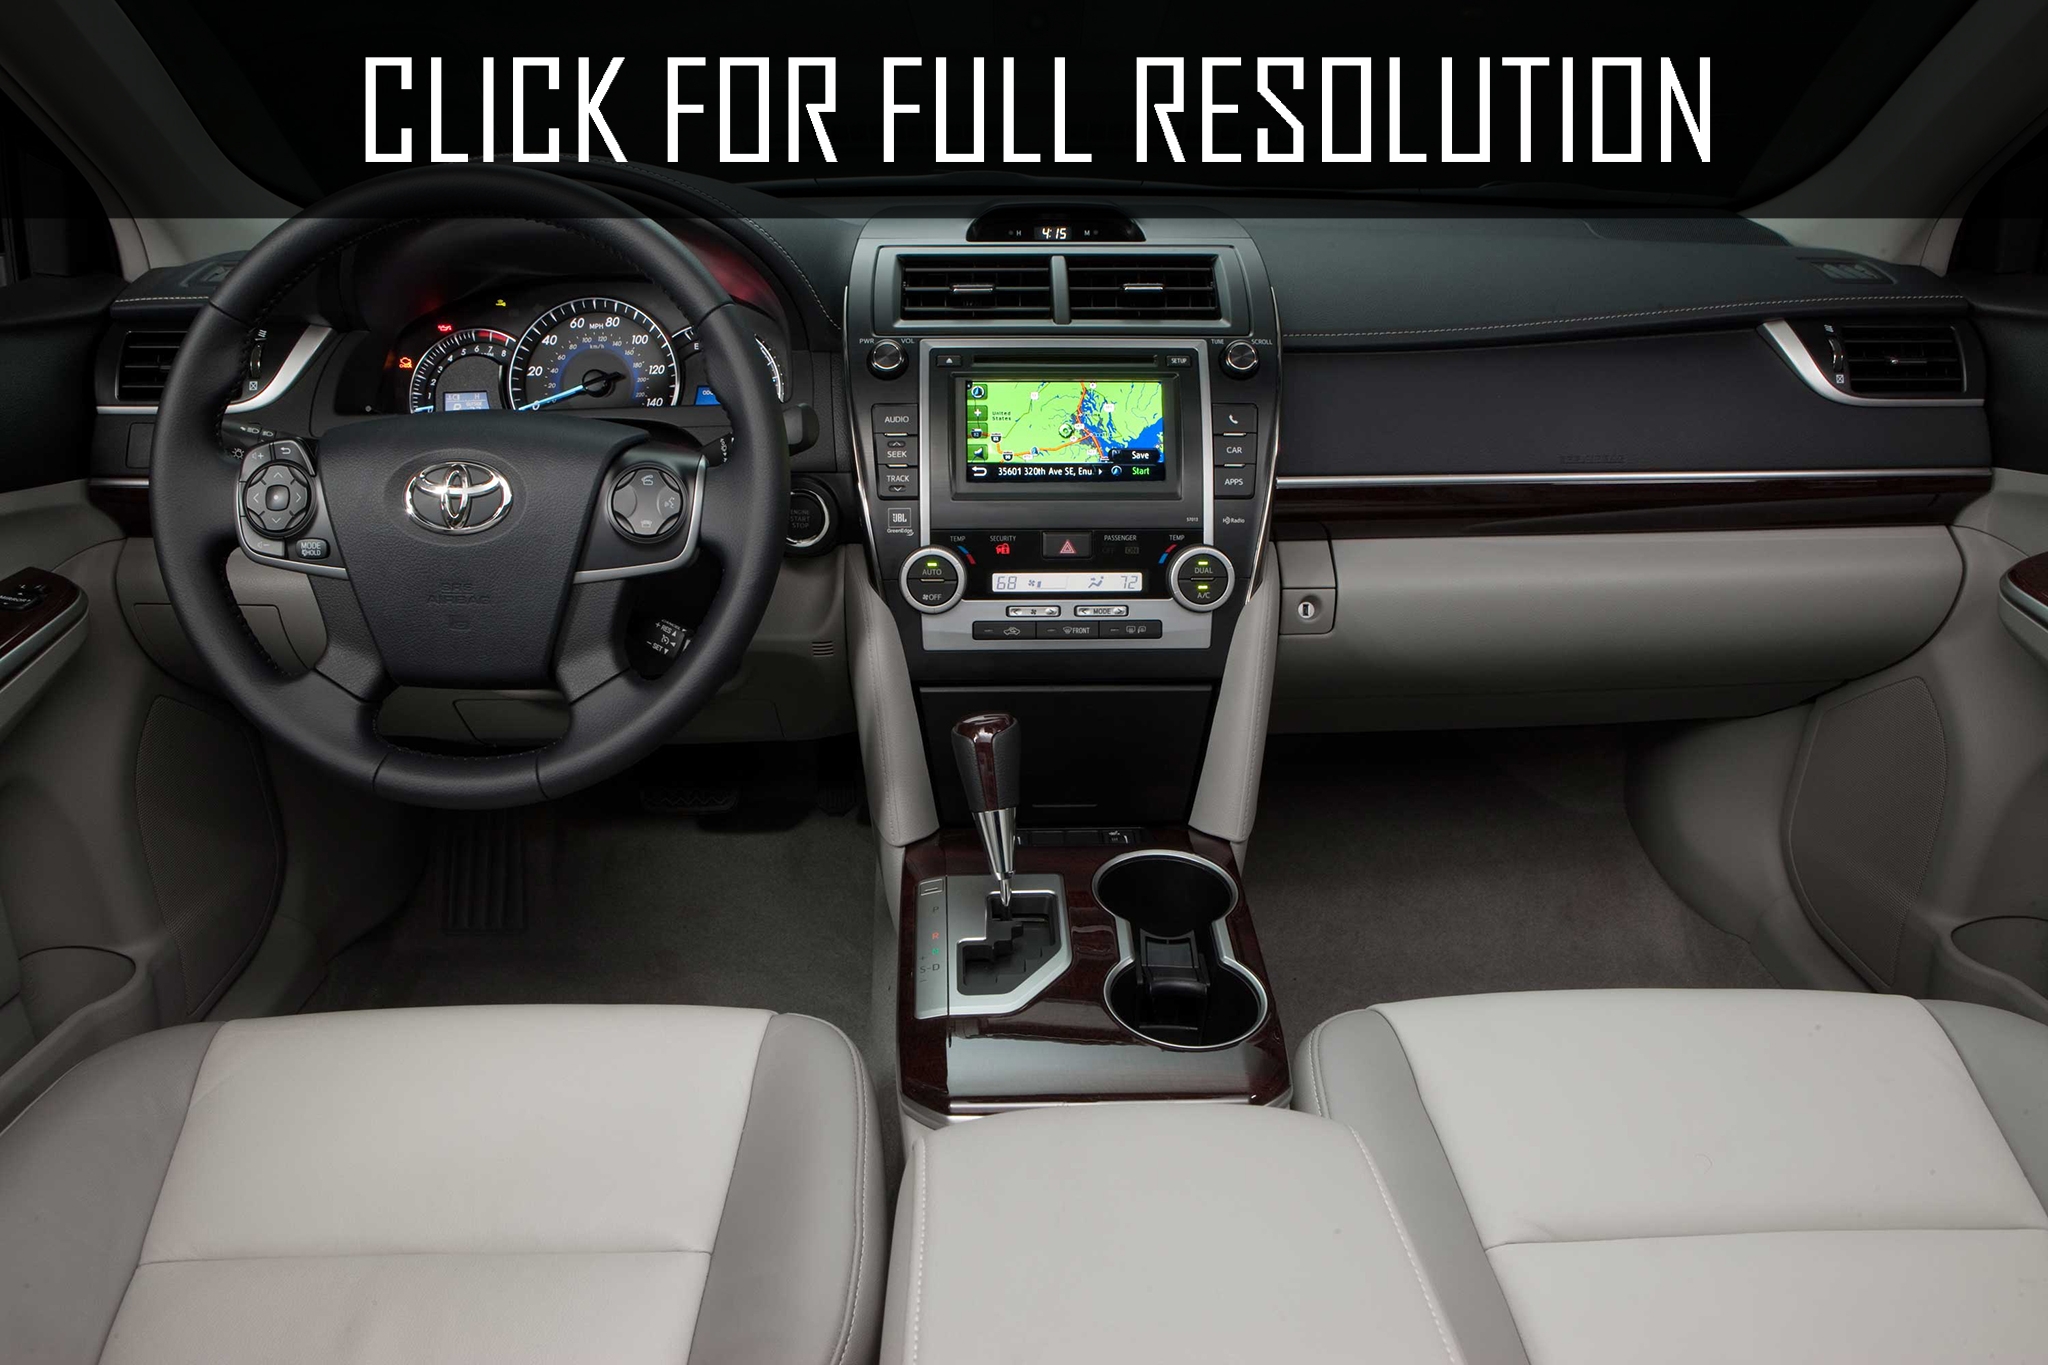 2013 Toyota Camry Xle